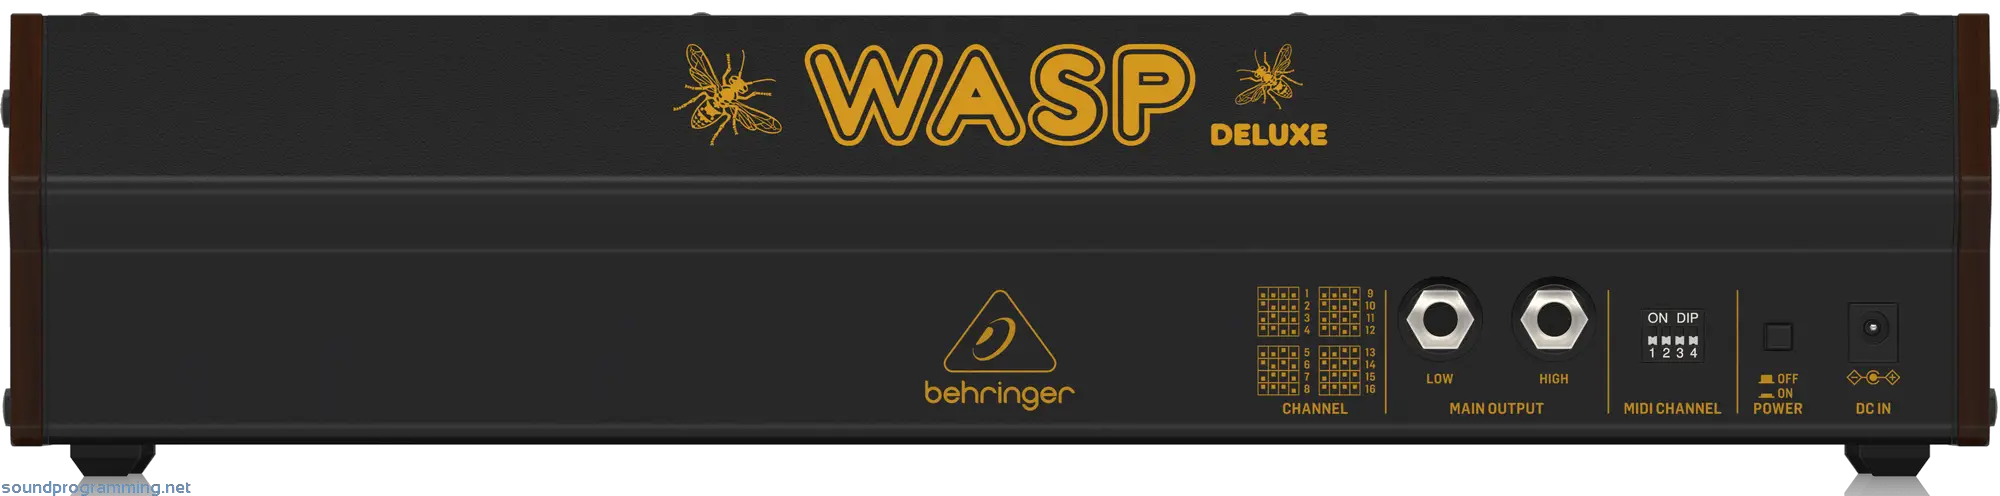 Behringer Wasp Deluxe Back View